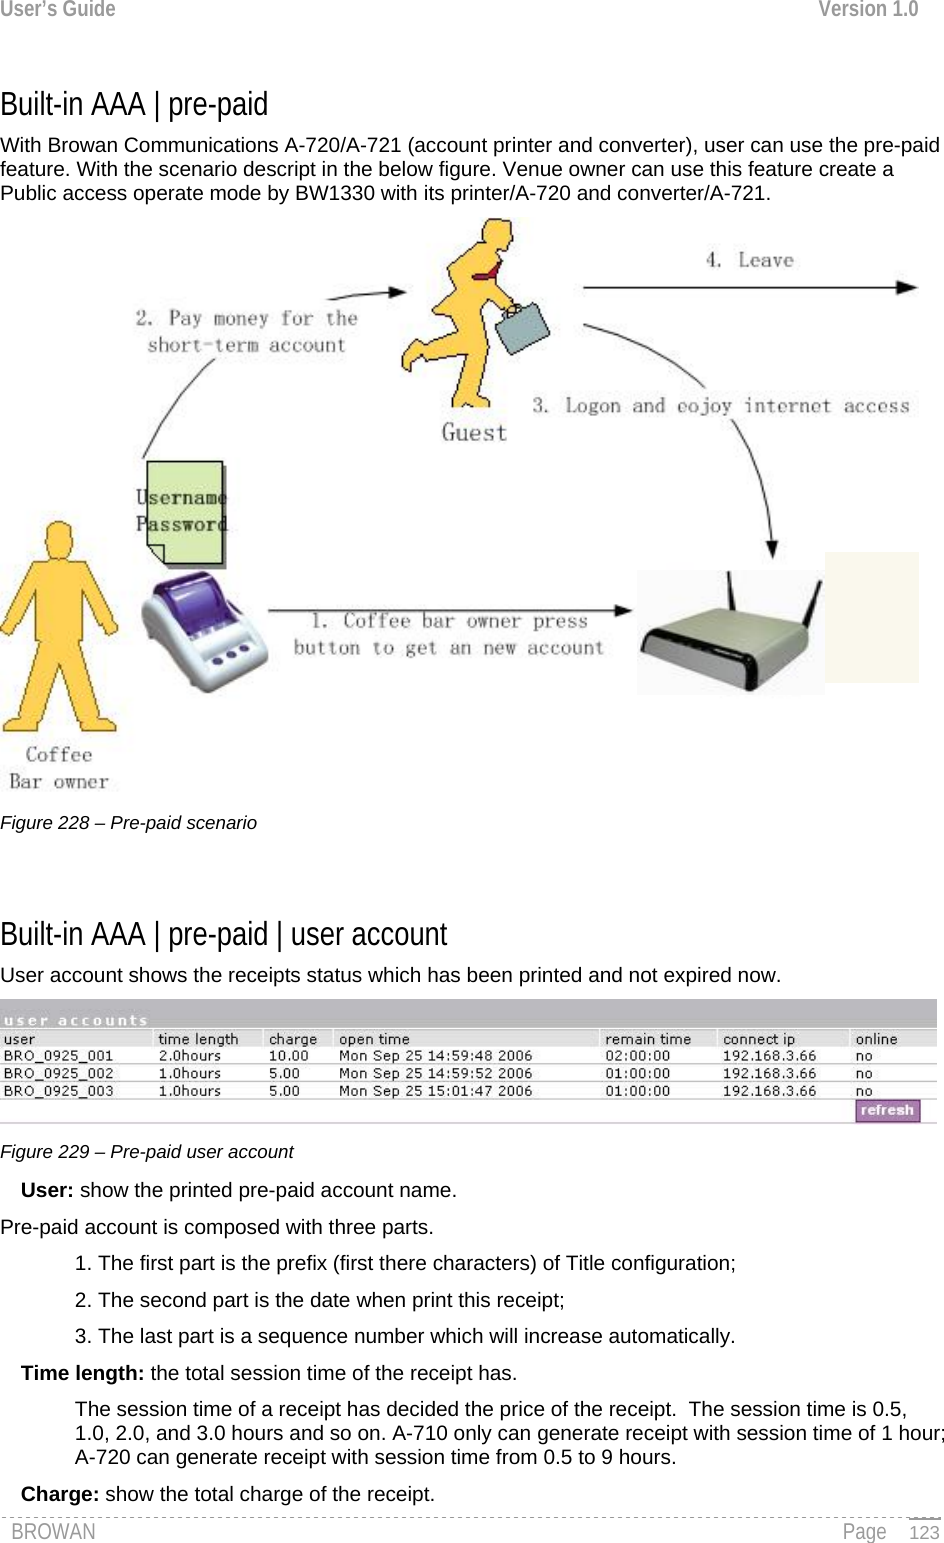 User’s Guide  Version 1.0  Built-in AAA | pre-paid With Browan Communications A-720/A-721 (account printer and converter), user can use the pre-paid feature. With the scenario descript in the below figure. Venue owner can use this feature create a Public access operate mode by BW1330 with its printer/A-720 and converter/A-721.  Figure 228 – Pre-paid scenario  Built-in AAA | pre-paid | user account User account shows the receipts status which has been printed and not expired now.   Figure 229 – Pre-paid user account User: show the printed pre-paid account name. Pre-paid account is composed with three parts. 1. The first part is the prefix (first there characters) of Title configuration;  2. The second part is the date when print this receipt;  3. The last part is a sequence number which will increase automatically. Time length: the total session time of the receipt has. The session time of a receipt has decided the price of the receipt.  The session time is 0.5, 1.0, 2.0, and 3.0 hours and so on. A-710 only can generate receipt with session time of 1 hour; A-720 can generate receipt with session time from 0.5 to 9 hours.  Charge: show the total charge of the receipt. BROWAN                                                                                                                                               Page   123